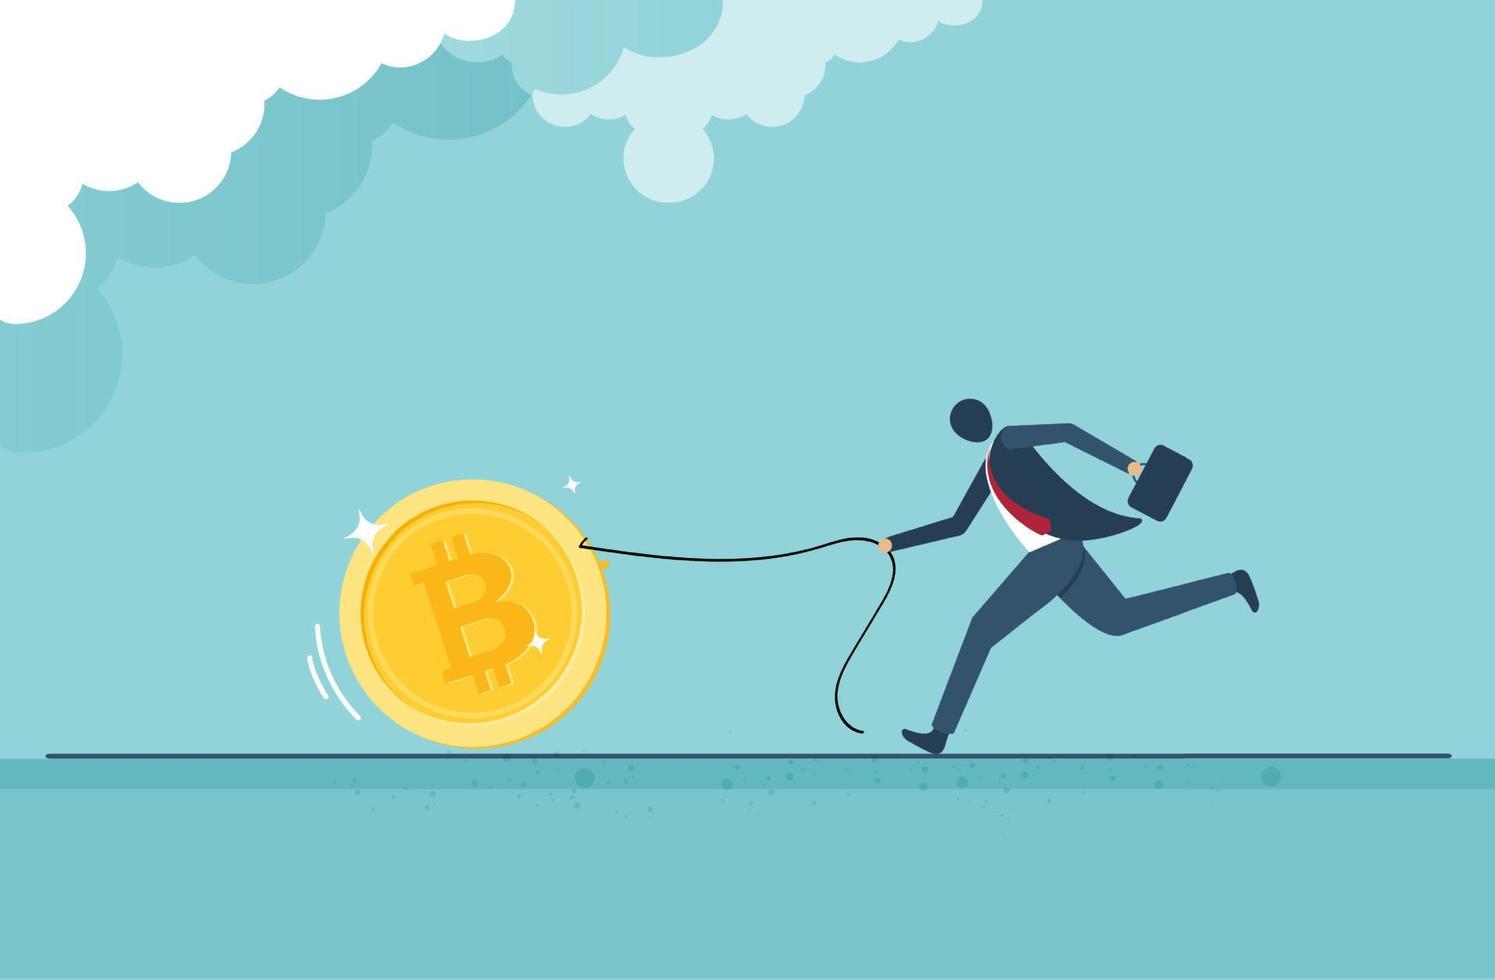 Bitcoin business - Businessman pull the rope of bitcoin on sale when cryptocurrency price crash to make profit concept, smart man buying or purchasing to speculate earning in the future. vector design